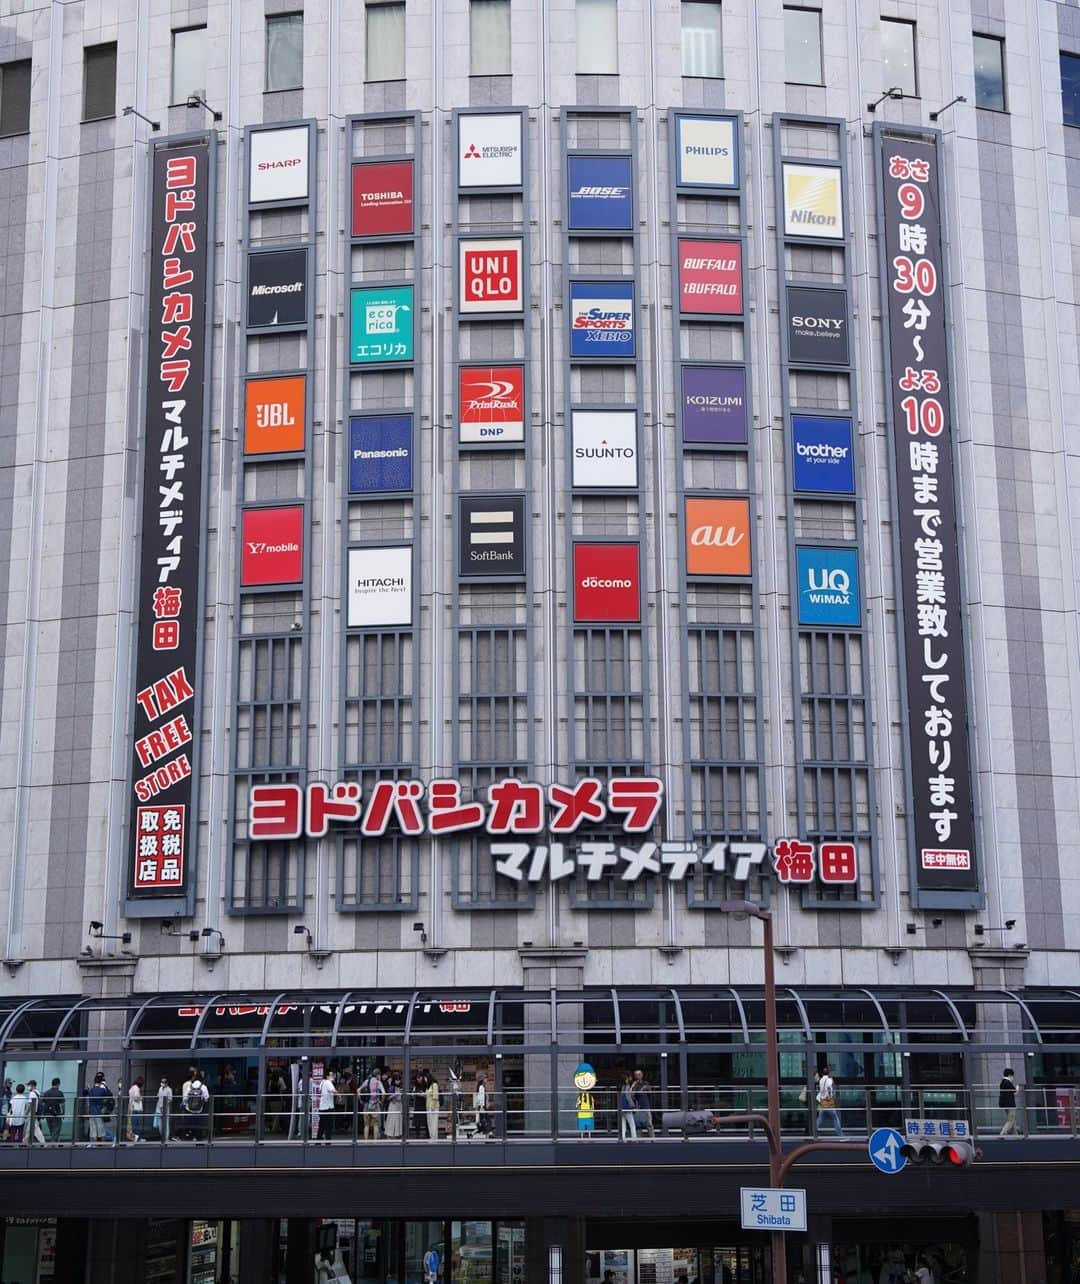 Osaka Bob（大阪観光局公式キャラクター）のインスタグラム：「Yodobashi Camera Multimedia Umeda boasts the largest sales floor area🏢, offering a wide range of the latest gadgets and home appliances, and it's very popular among foreign tourists due to its extensive selection and competitive prices. 📷📺📱 It's also great that they have product descriptions in various languages and staff who can speak foreign languages on hand. 😁   最大の売り場面積を誇る「ヨドバシカメラ マルチメディア梅田」🏢最新のガジェットや家電が揃い、豊富な品揃えとお得な価格で外国人観光客に大人気📷📺📱外国語の説明書きや外国語が話せるスタッフが常駐しているのも嬉しいね😁  —————————————————————  #maido #withOsakaBob #OSAKA #osakatrip #japan #nihon #OsakaJapan #大坂 #오사카 #大阪 #Оsака #Осака #โอซาก้า #大阪観光 #sightseeing #Osakatravel #Osakajepang #traveljepang #osakatravel #osakatrip #ヨドバシカメラ」